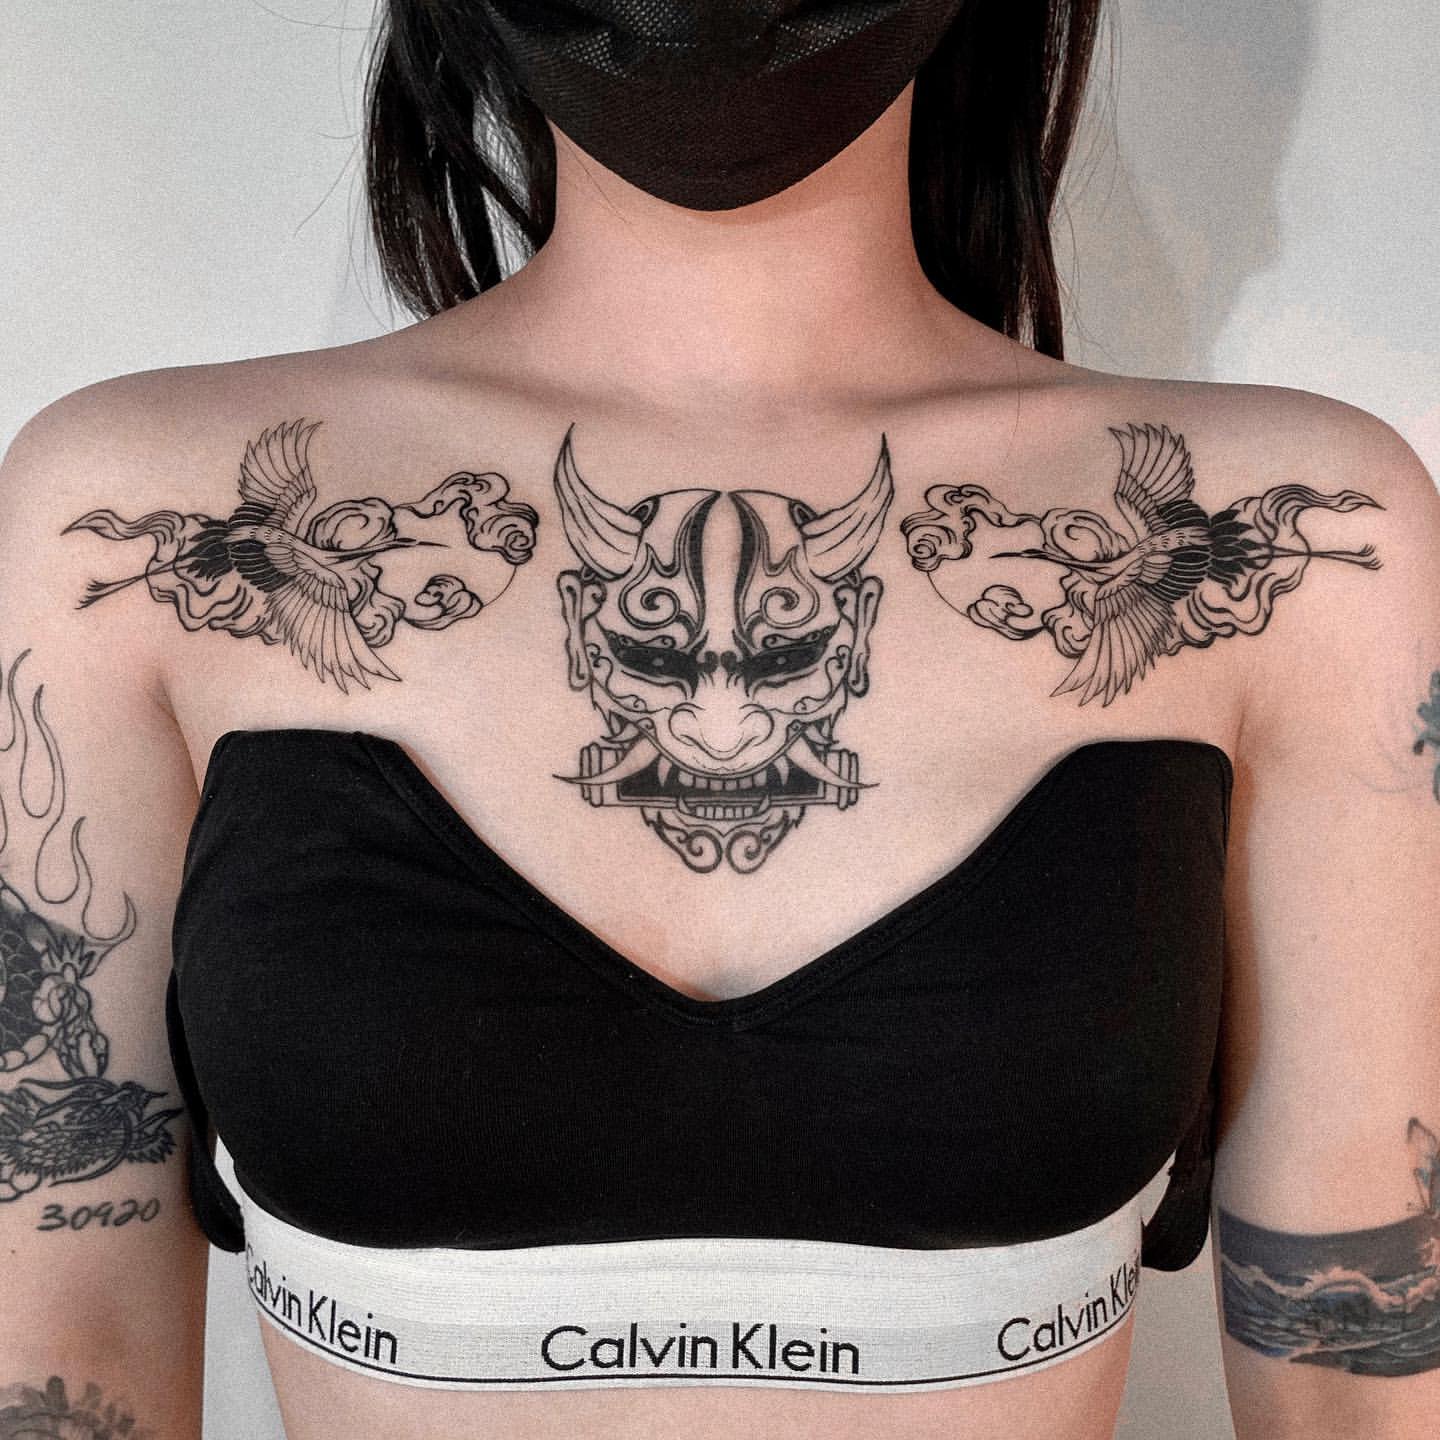 Chest Tattoos Ideas for Women 24